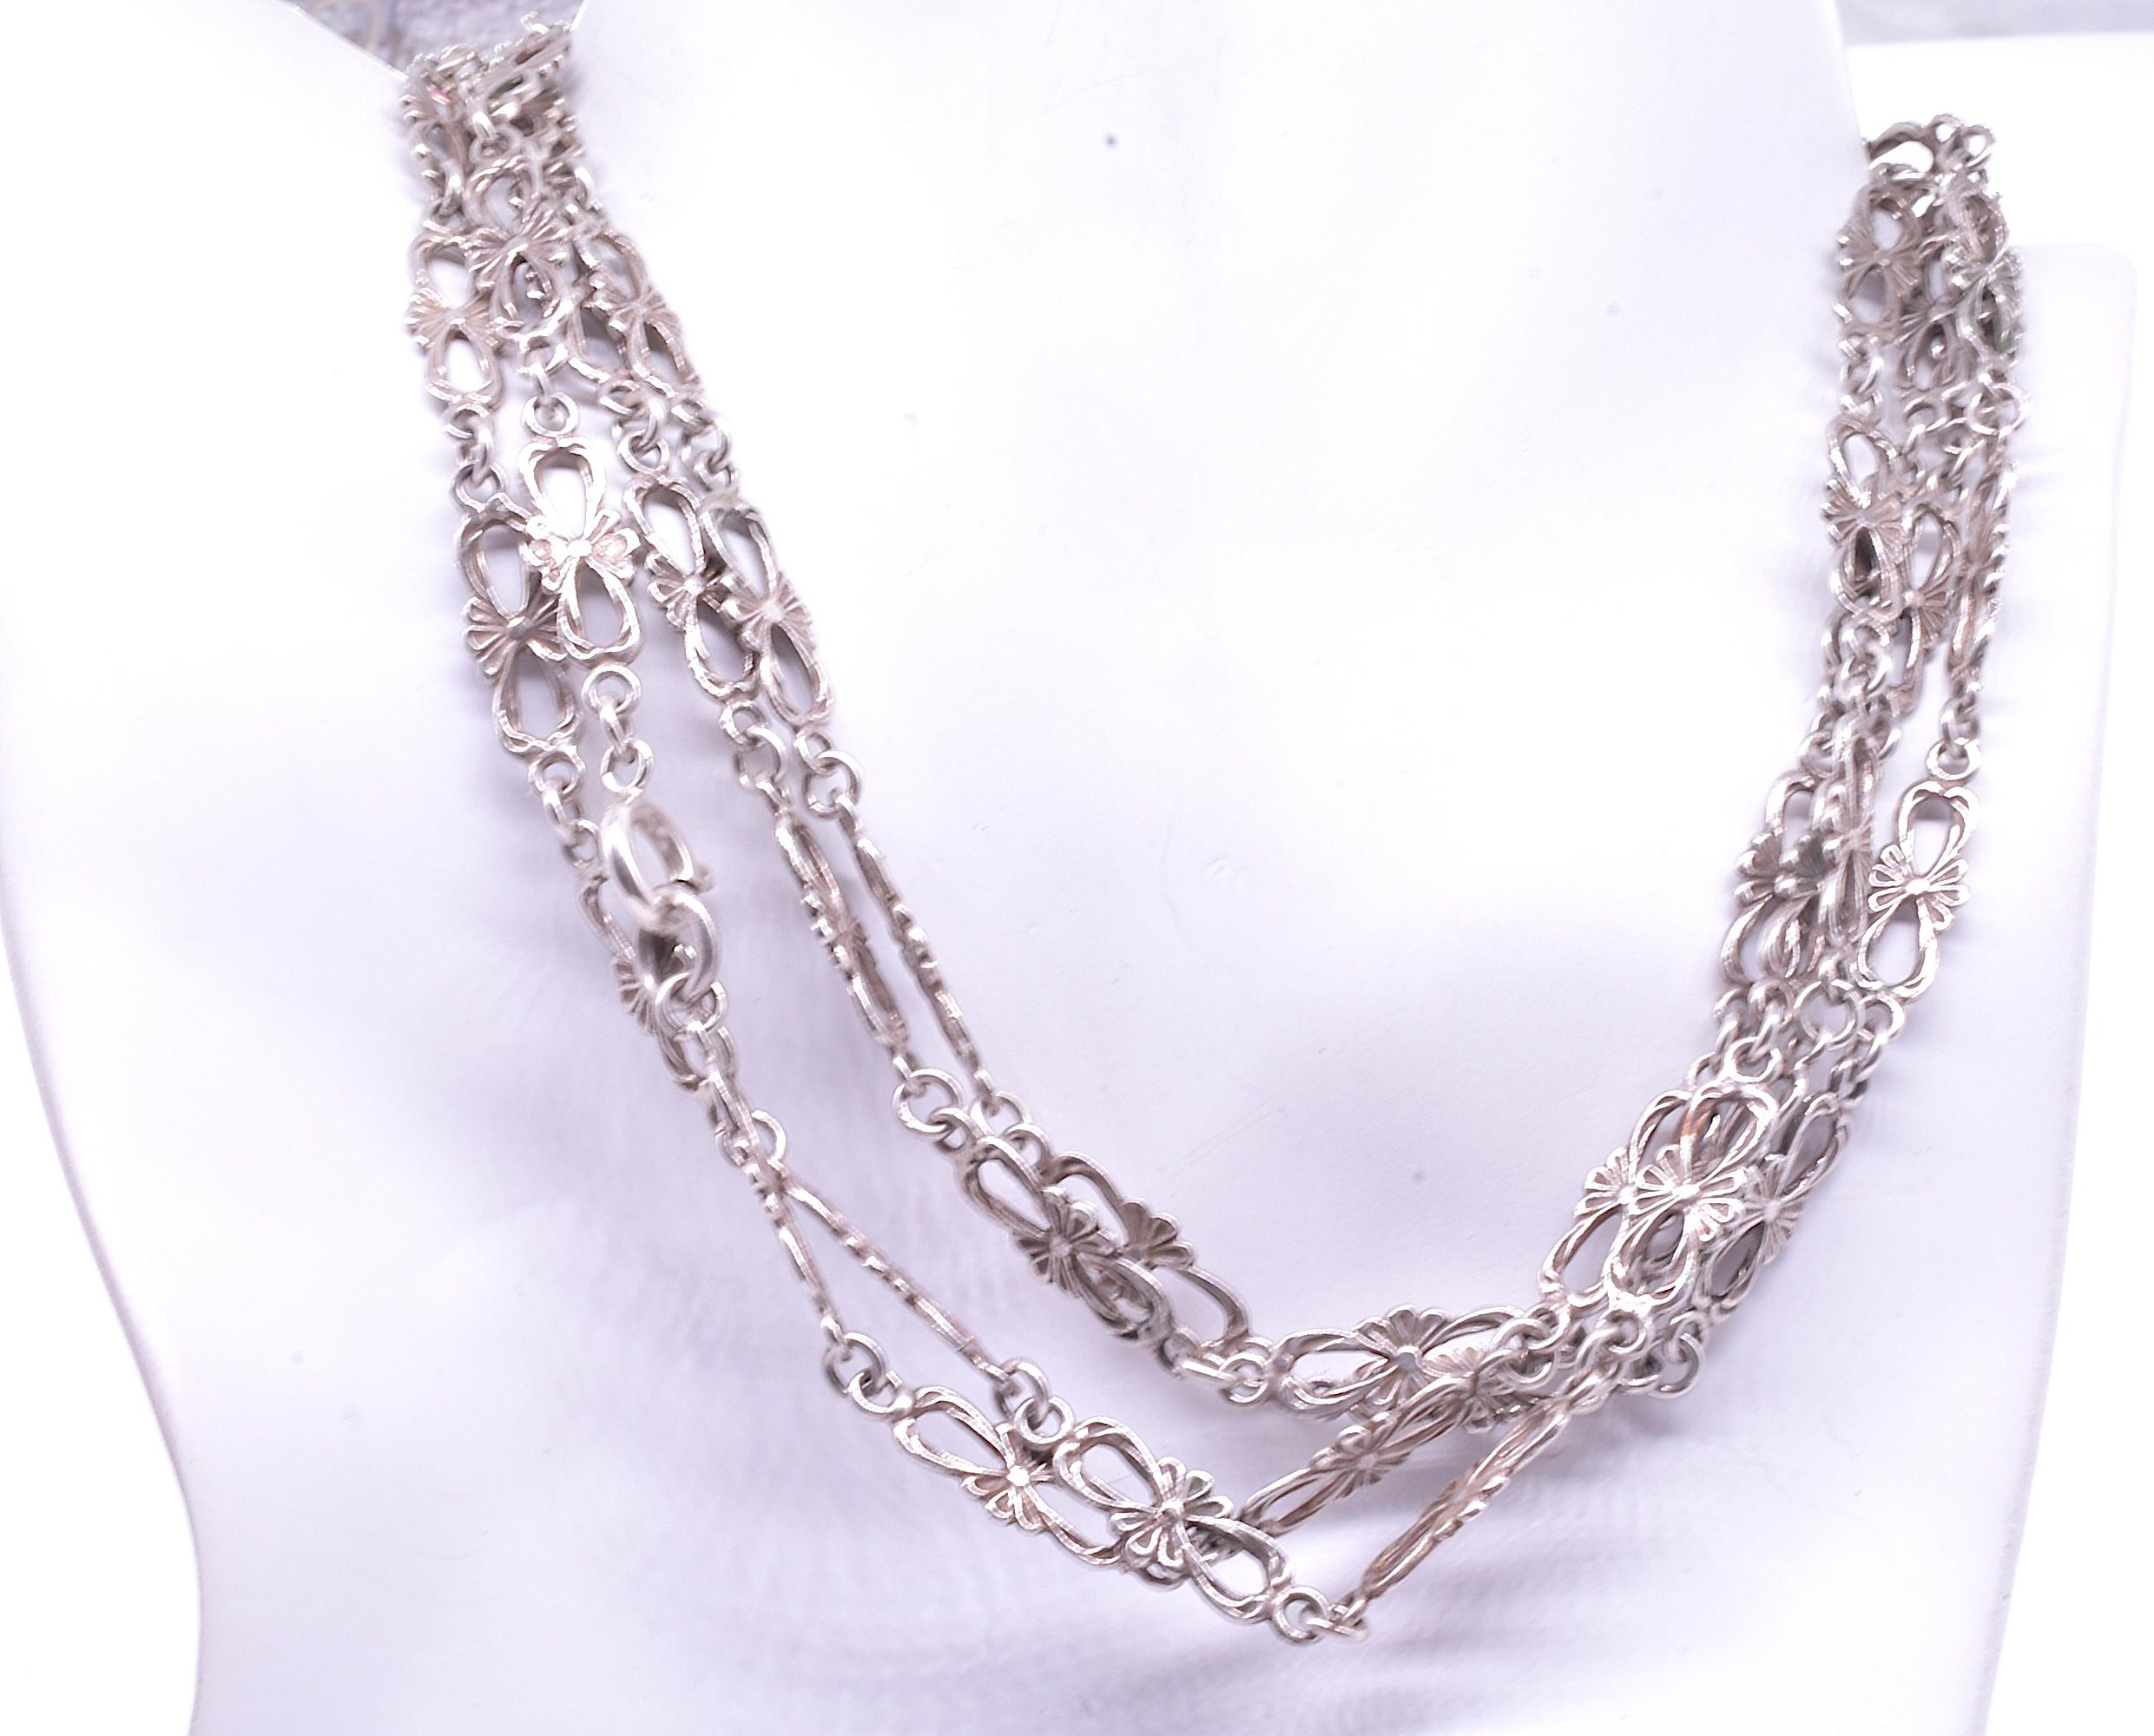 C1780 Georgian Sterling Muff Chain Made Up of Bow Links For Sale 2